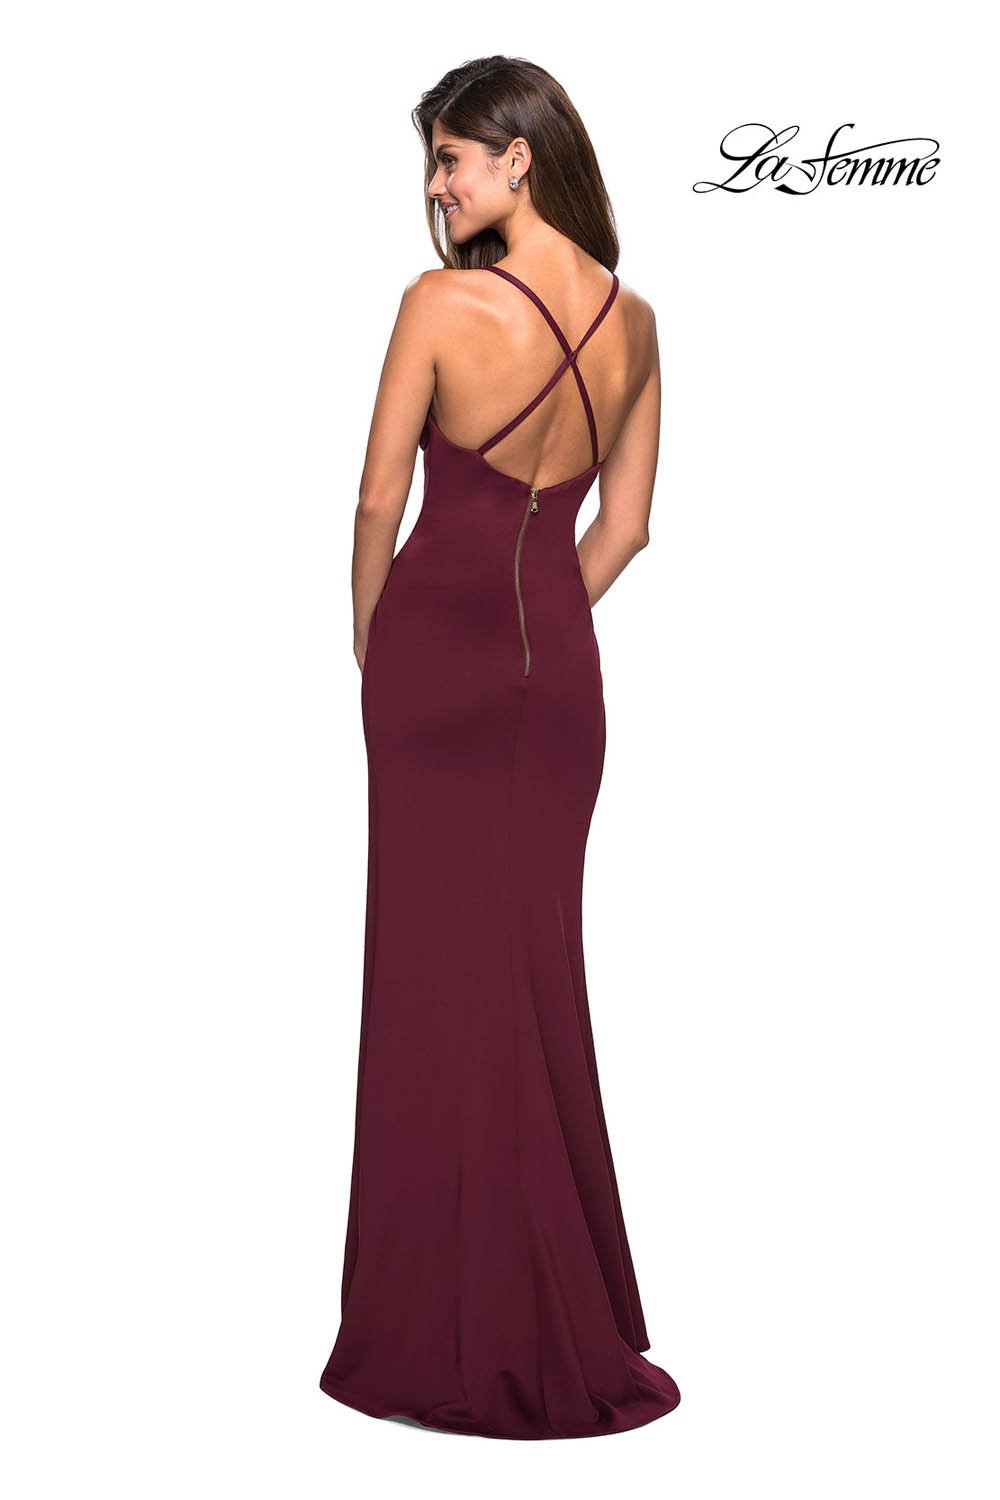 La Femme 27317 dress images in these colors: Navy, White, Wine.